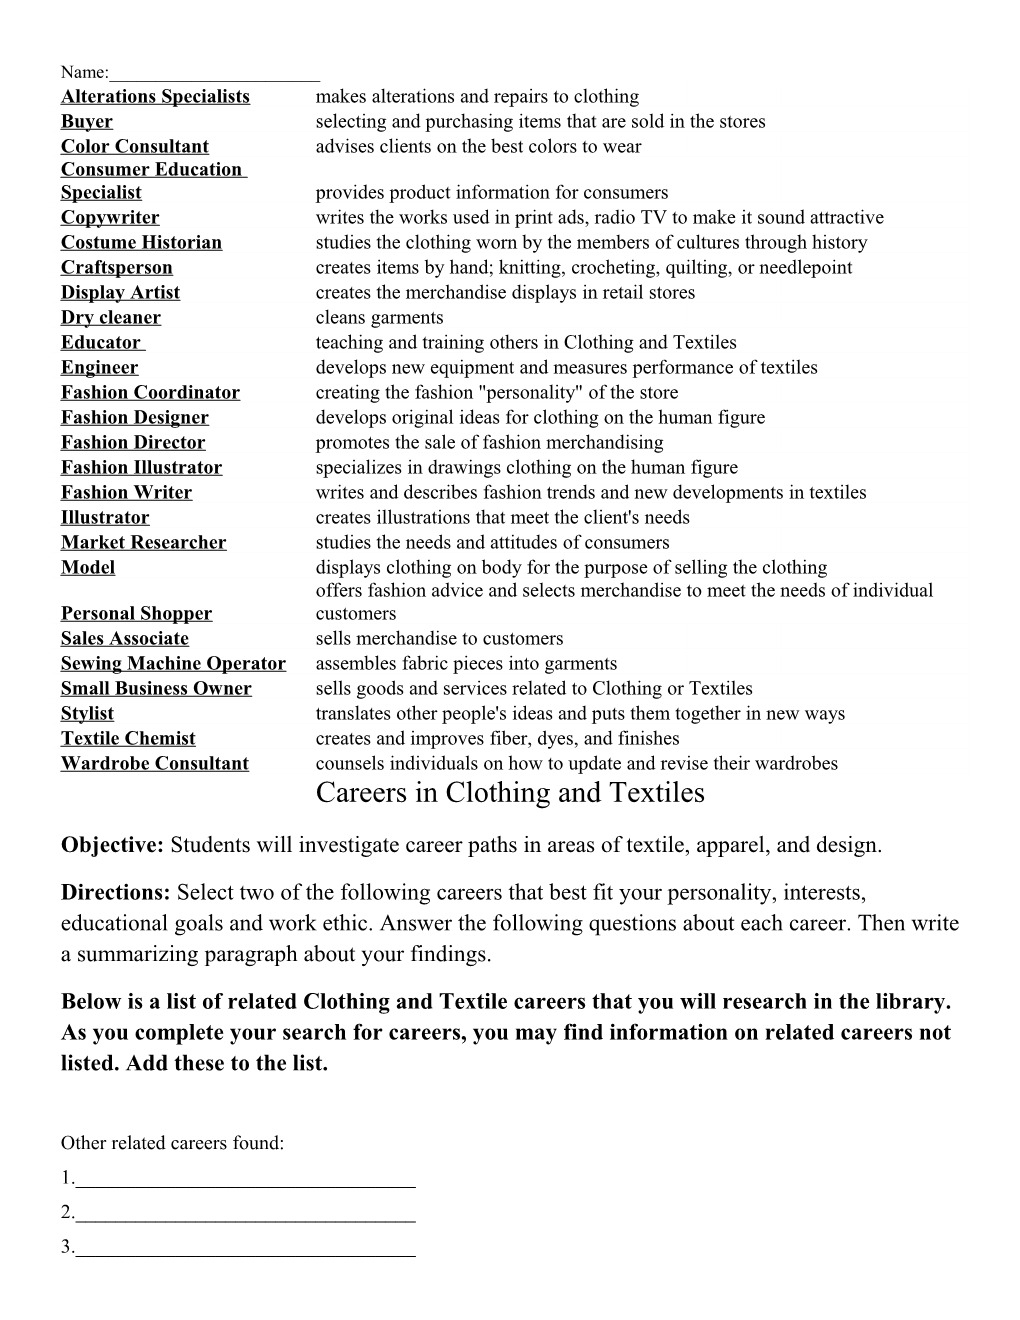 Careers in Clothing and Textiles